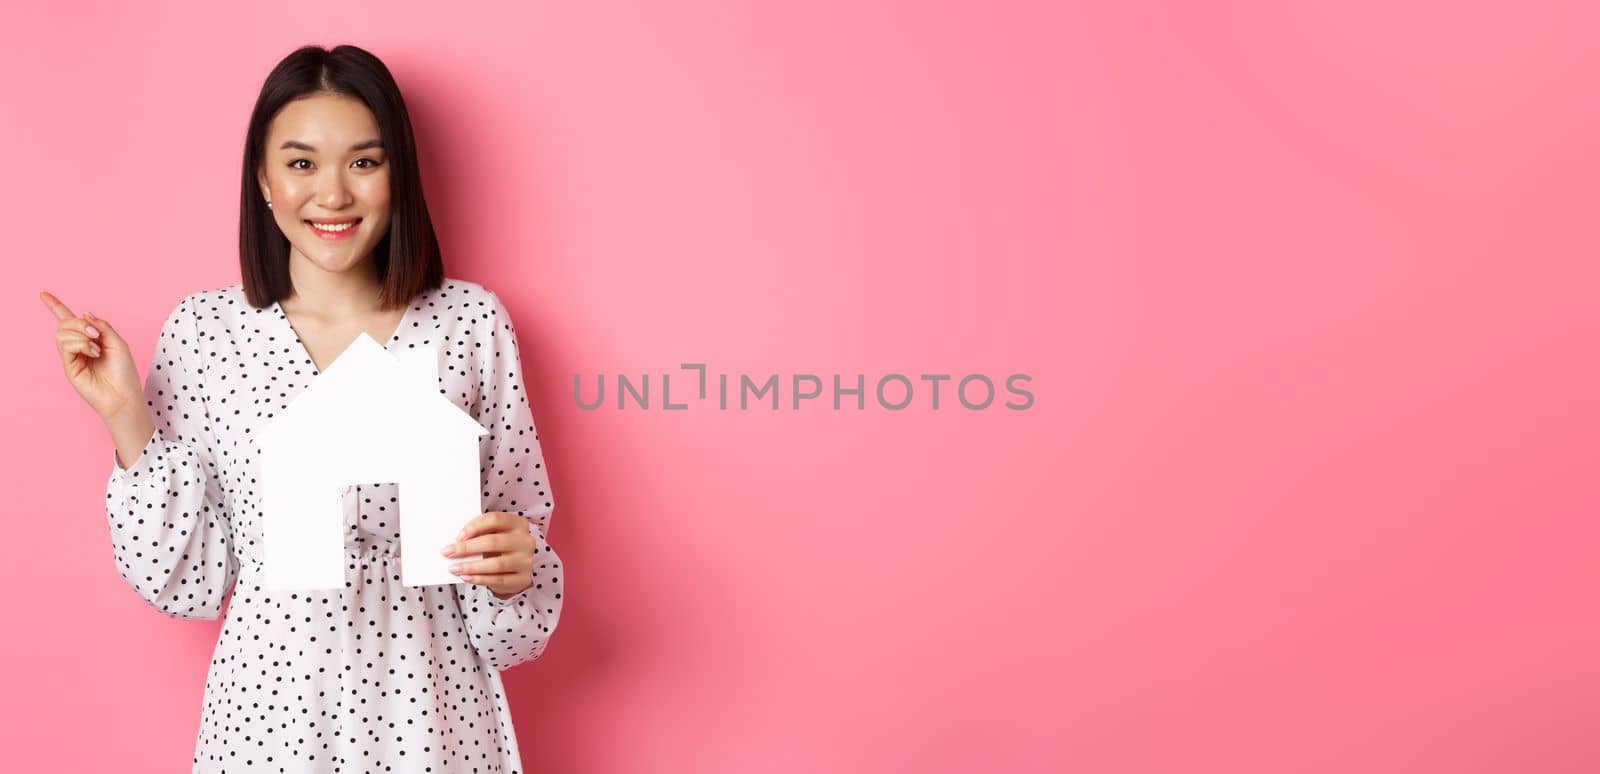 Real estate. Excited asian woman showing paper house model, pointing left at copy space, standing over pink background.